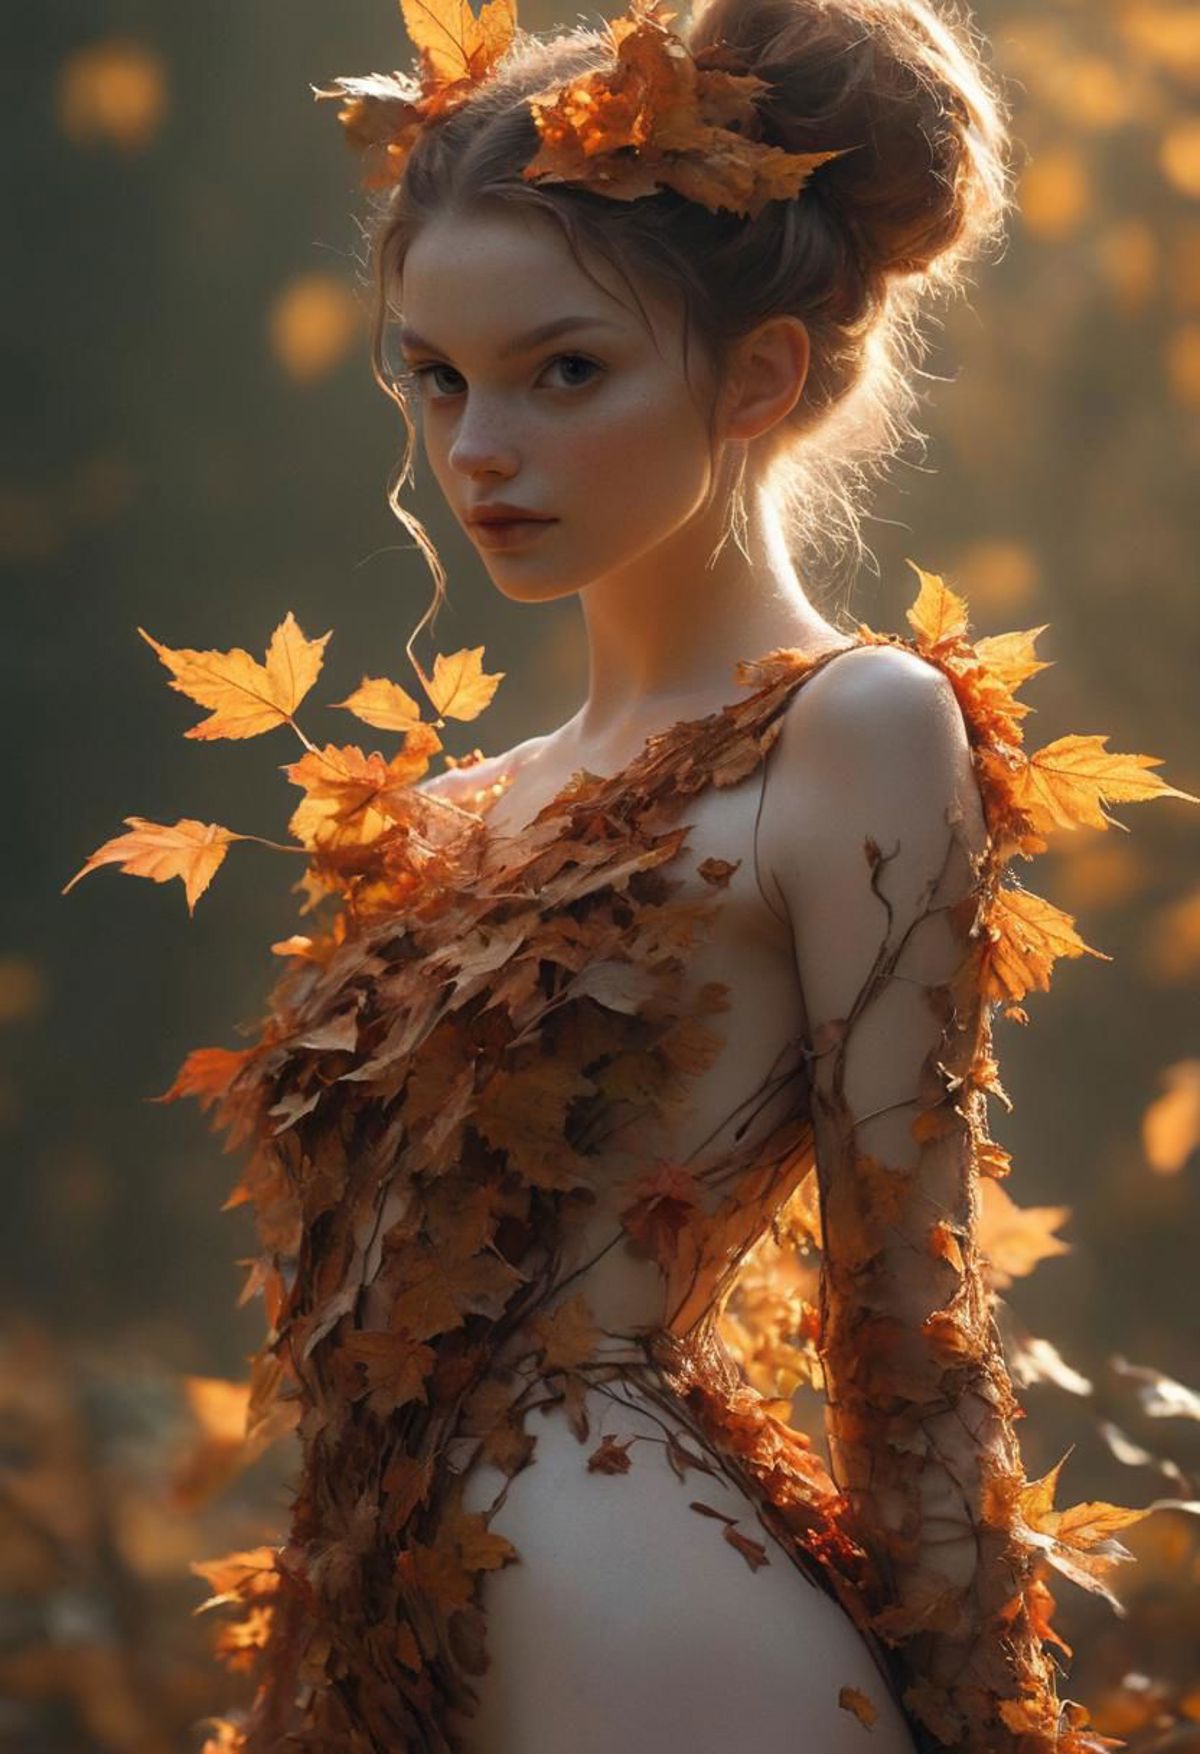 Artistic Portrait of a Naked Woman with Autumn Leaves Dress, Posing for a Picture.